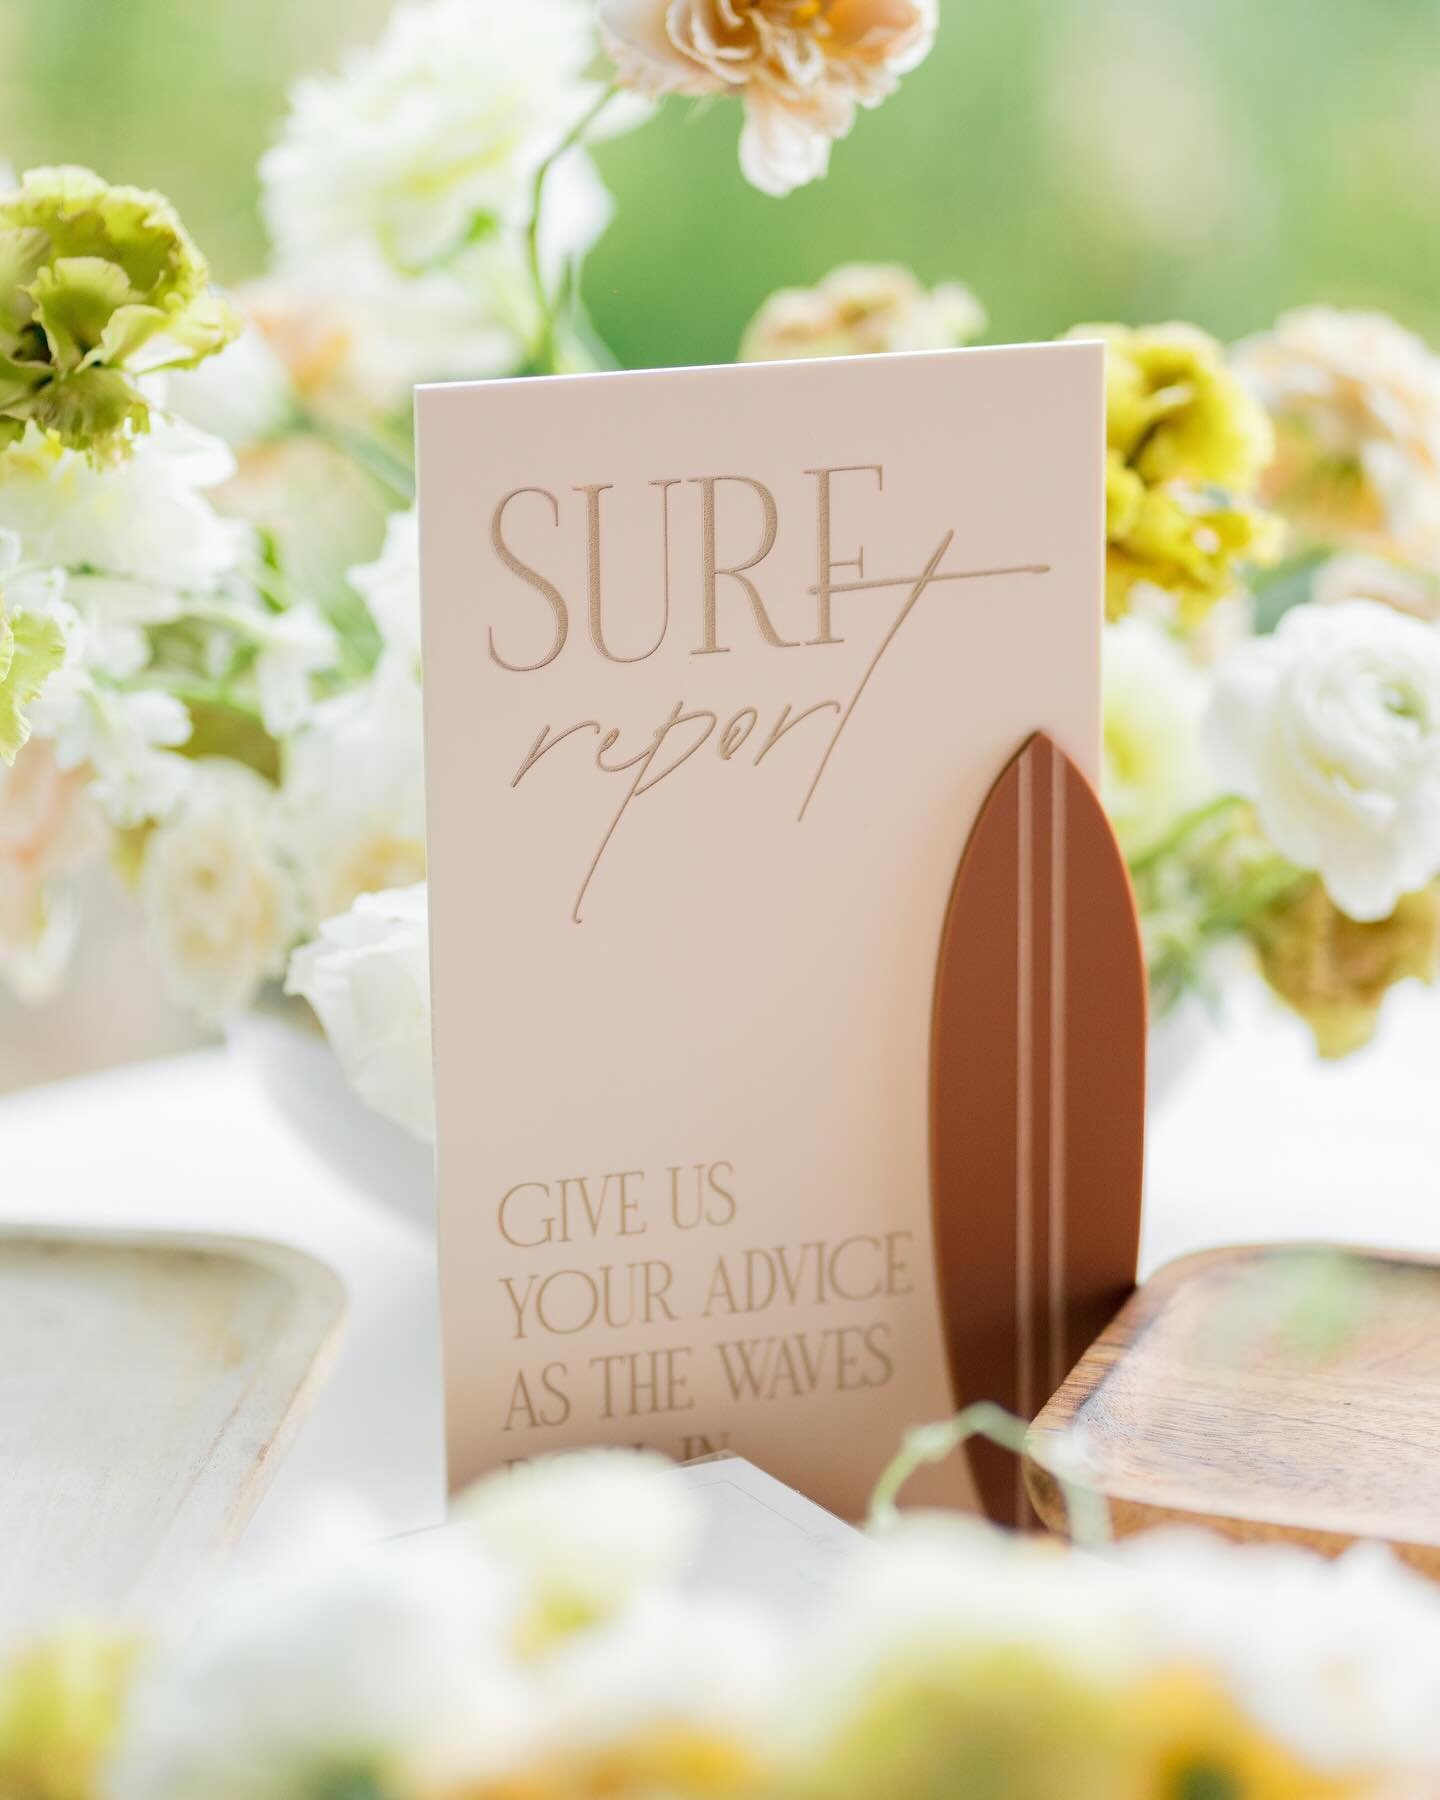 Love a guest book with a unique twist! D+A fused their love of surfing with their guest book, making for a fun signage moment! 🌊🏄

Photo: @mc_weddings 
Planner: @amorology 

#weddings #weddingphotographer #weddingplanner #luxurywedding #weddingstat